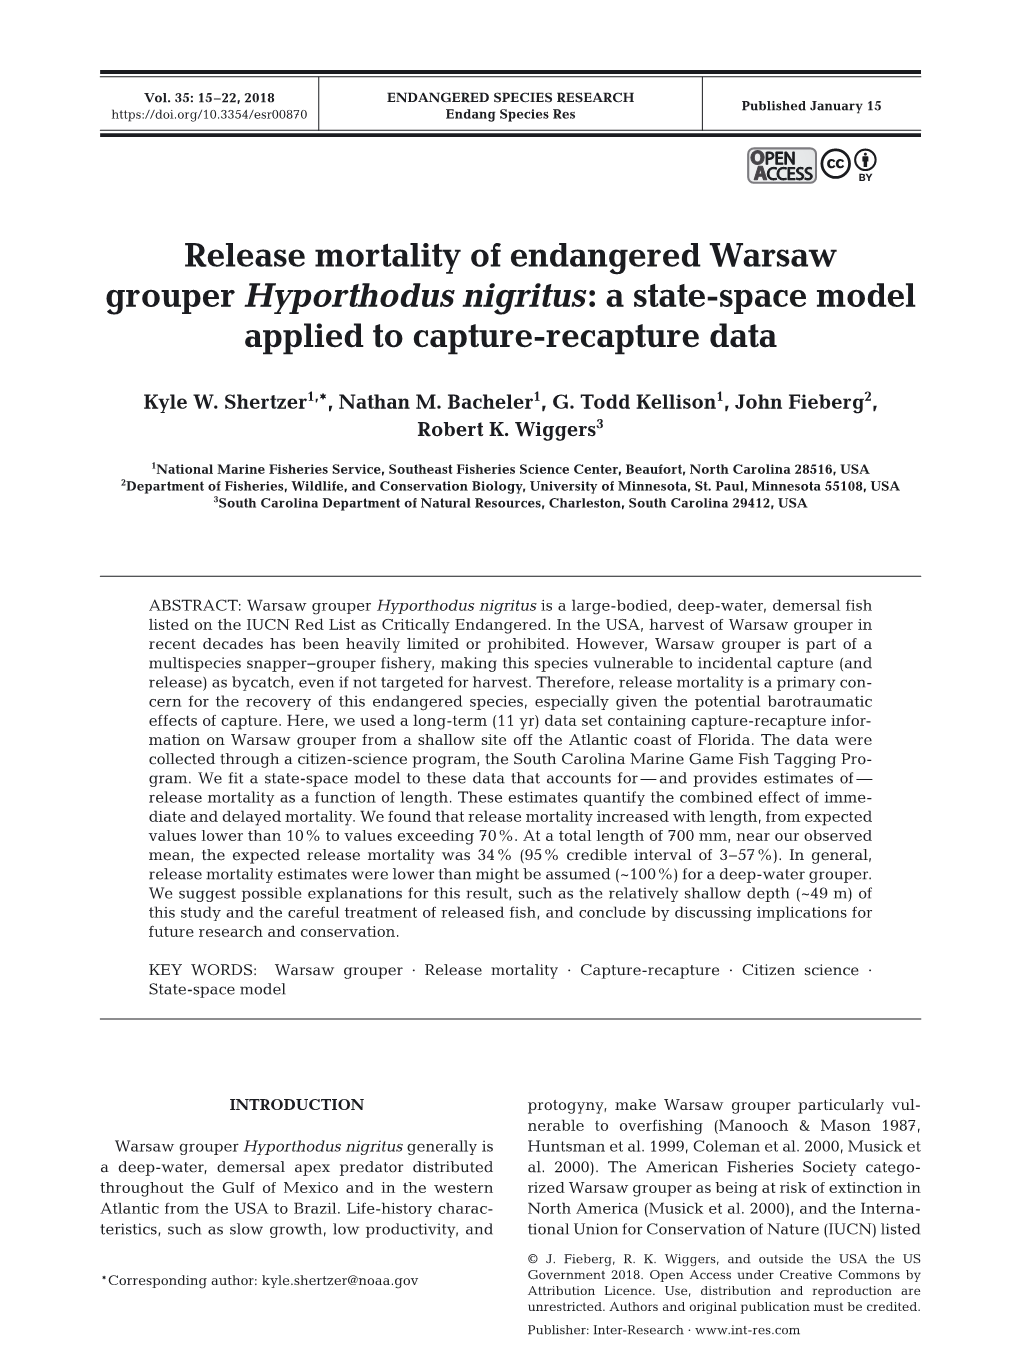 Release Mortality of Endangered Warsaw Grouper Hyporthodus Nigritus: a State-Space Model Applied to Capture-Recapture Data